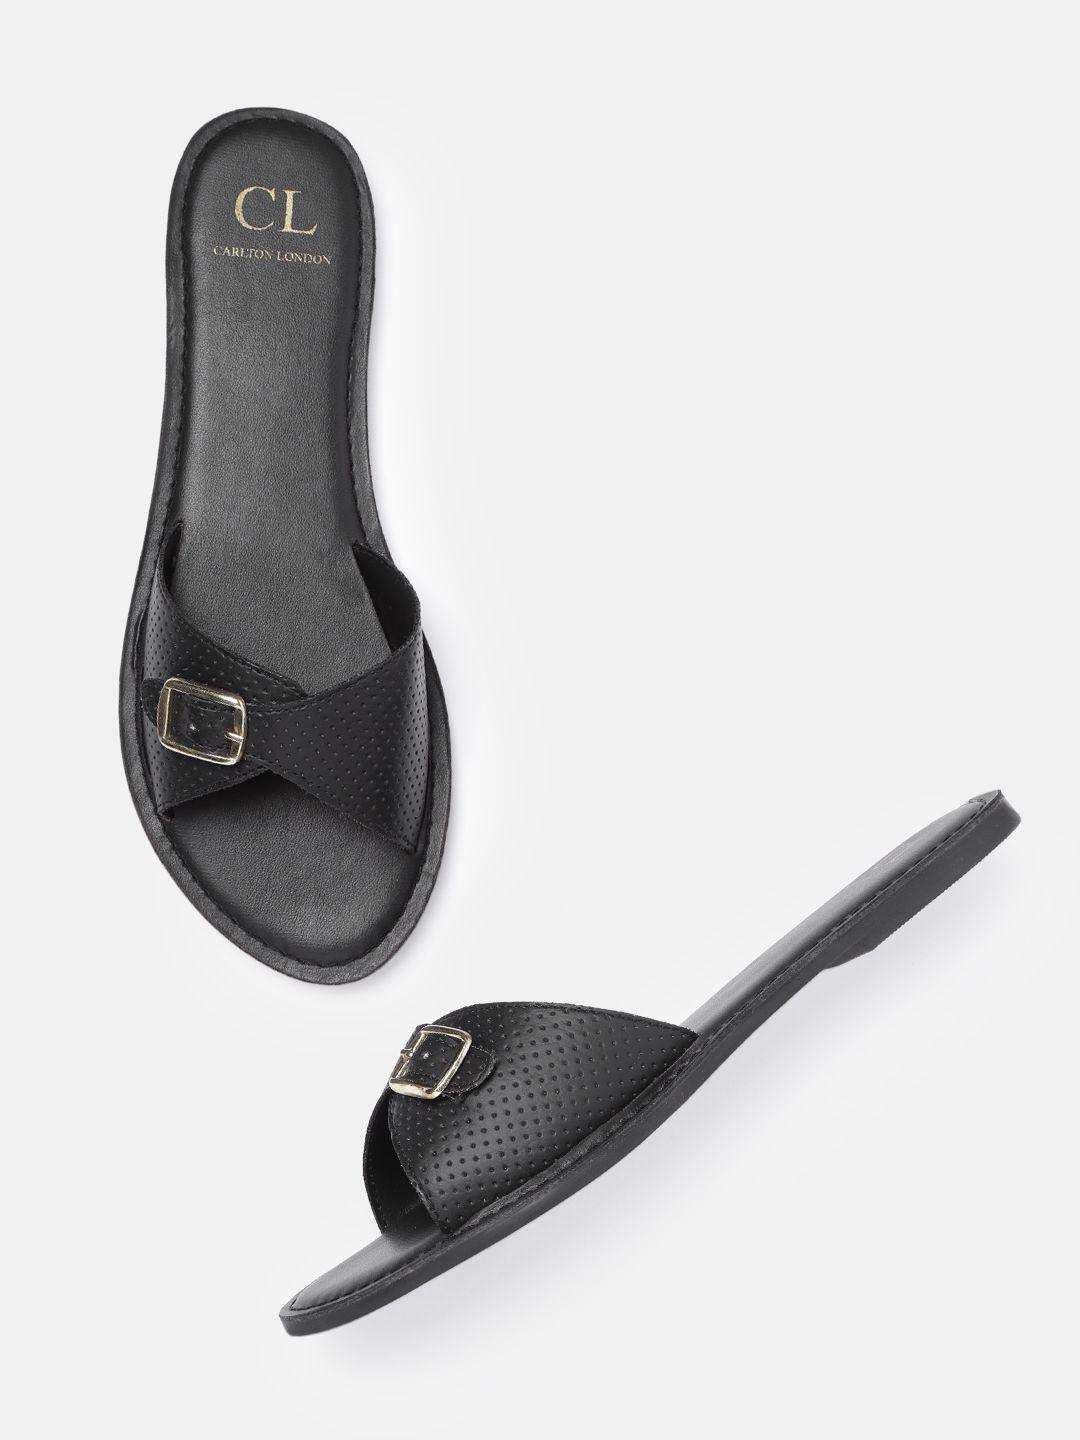 carlton-london-women-black-perforated-open-toe-flats-with-buckles